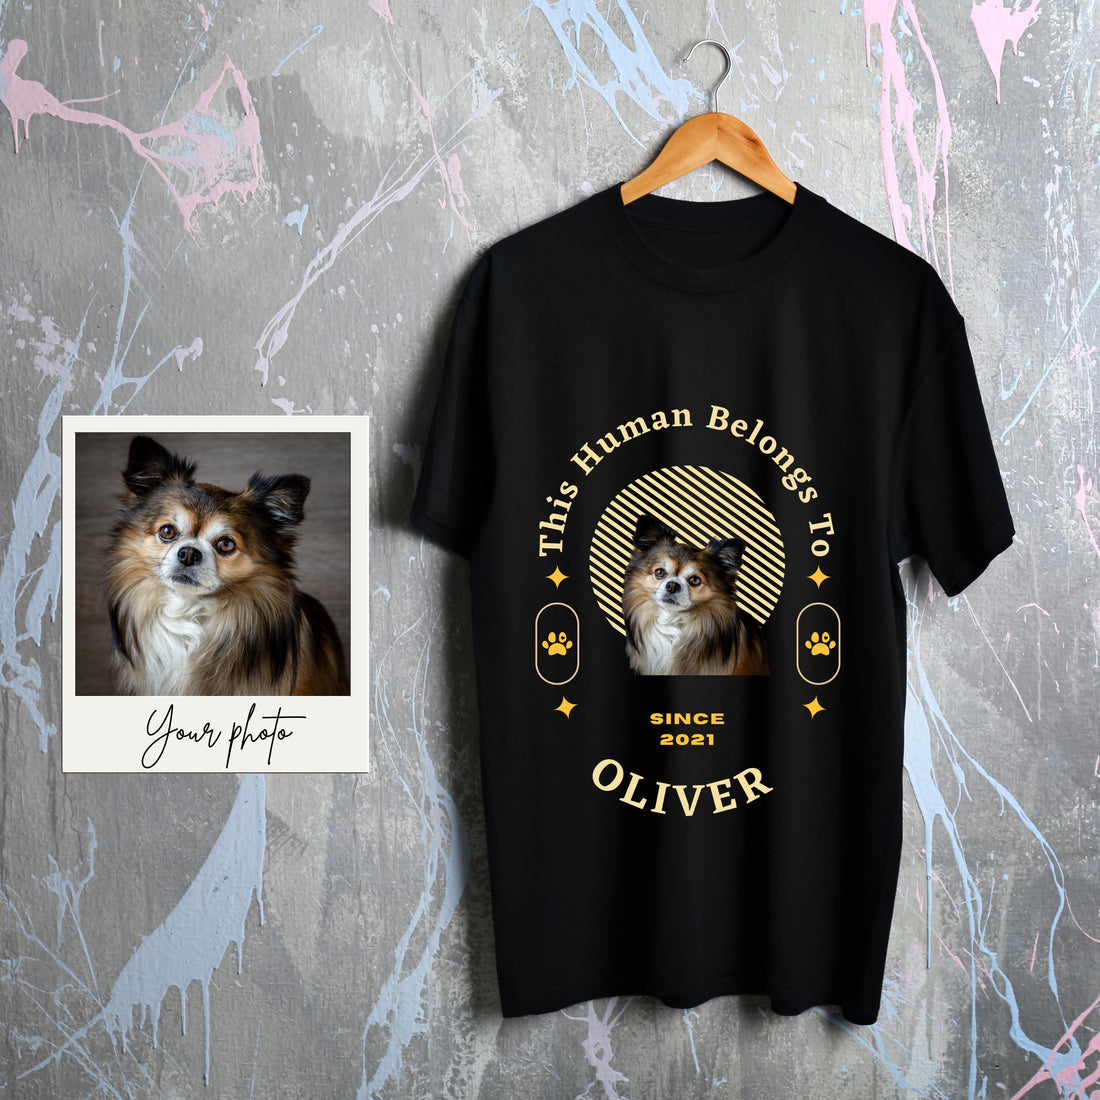 Customise Your Pet Photo Unisex T-shirt, Personalised Name This Human belongs To Dog Lover Shirt, Cat Image Custom T Shirt, Personalised Tee Shirts Birthday Gift